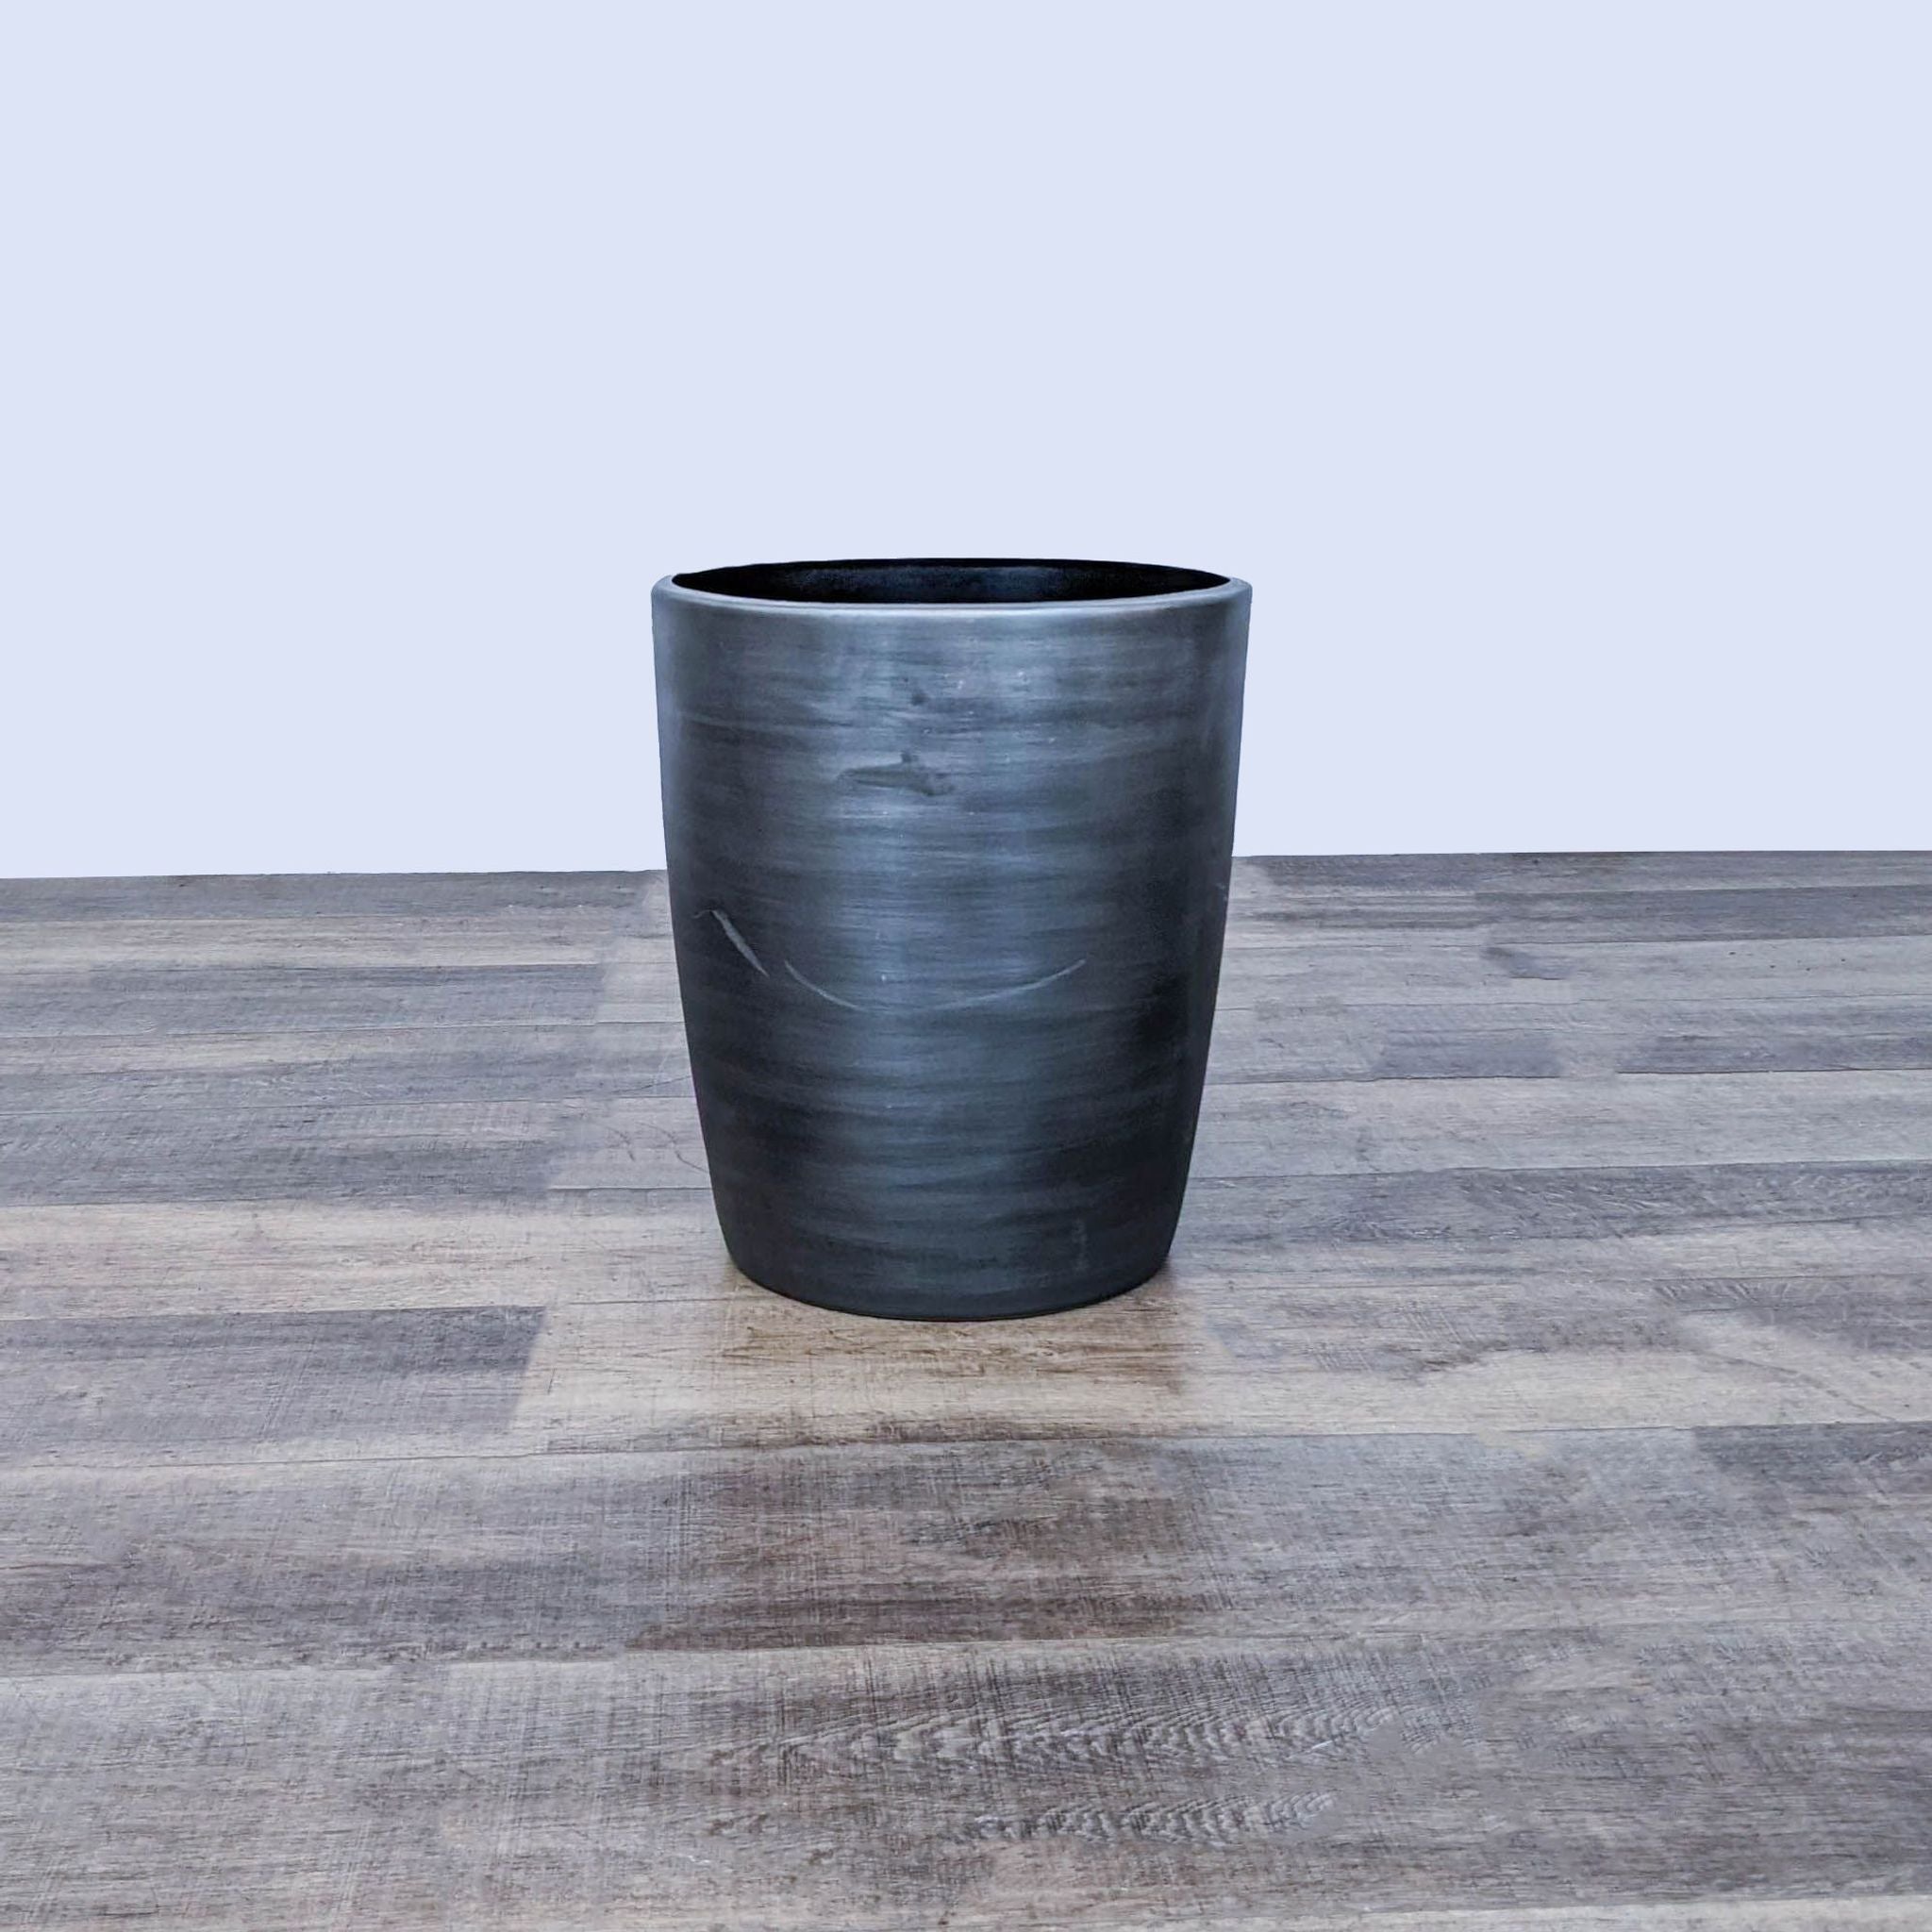 Reperch drum table on wooden floor, cylindrical shape with a black distressed finish.